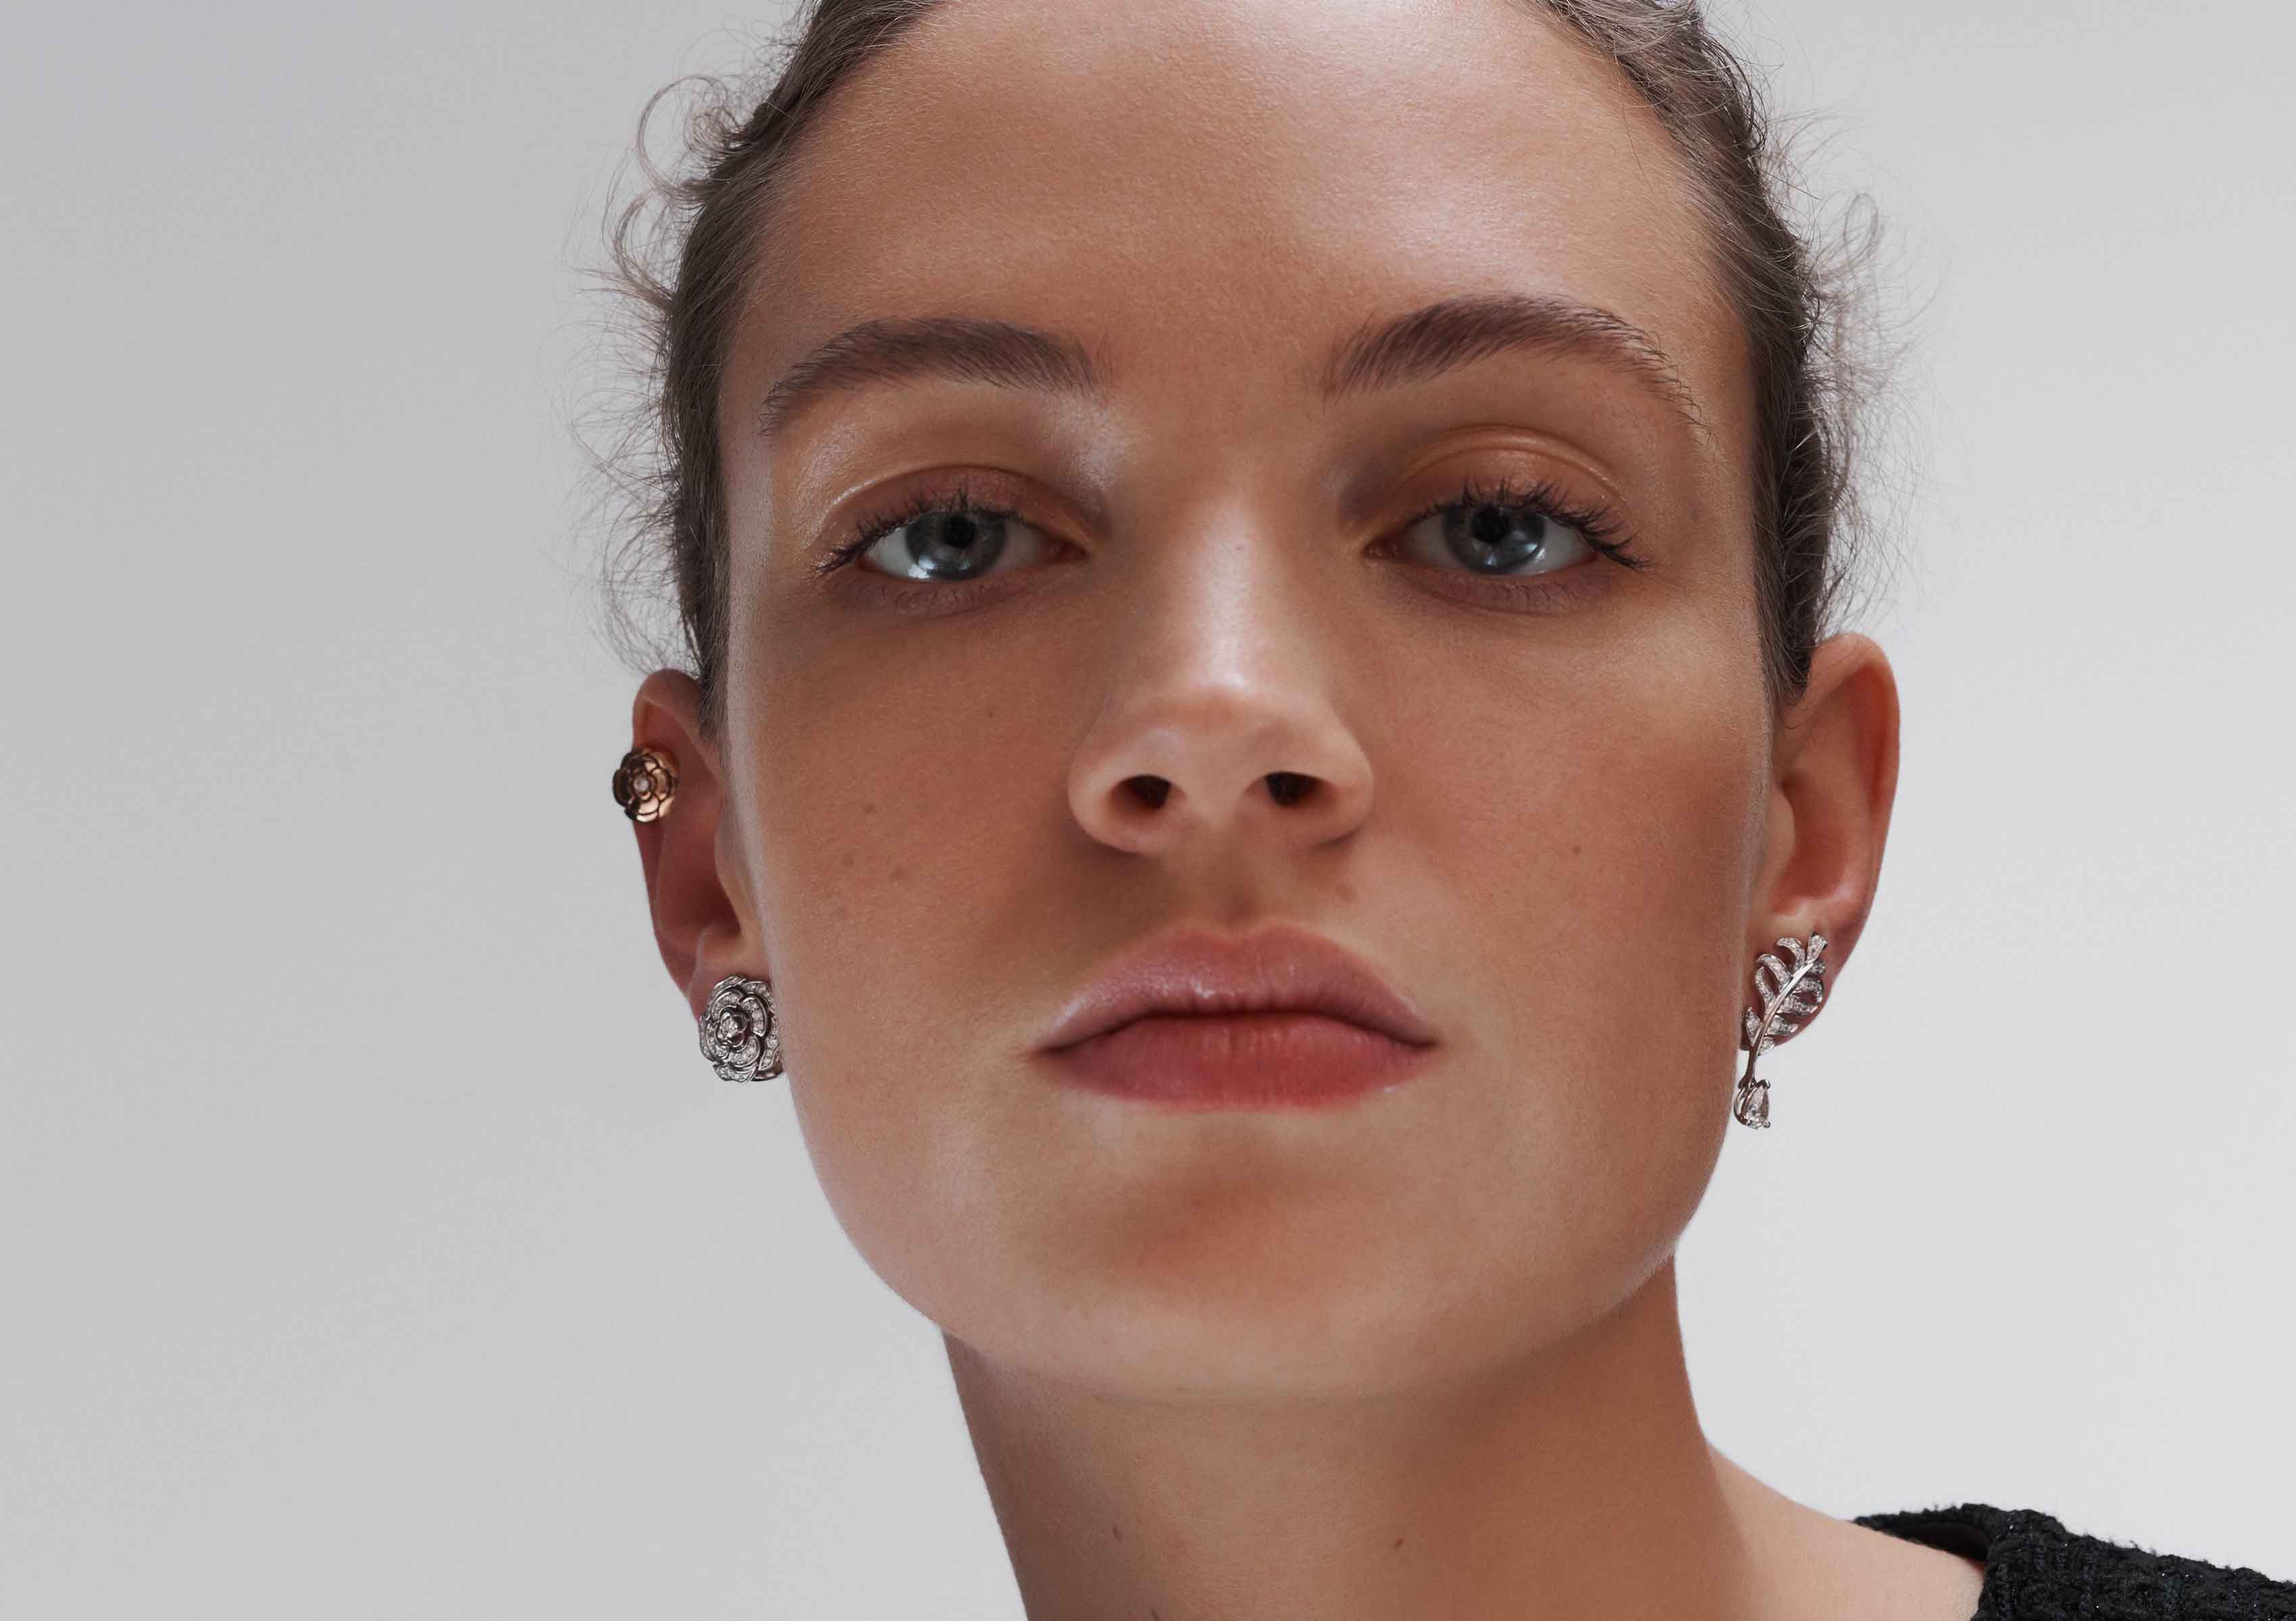 How to wear your earrings in 2020? The answer with CHANEL's style